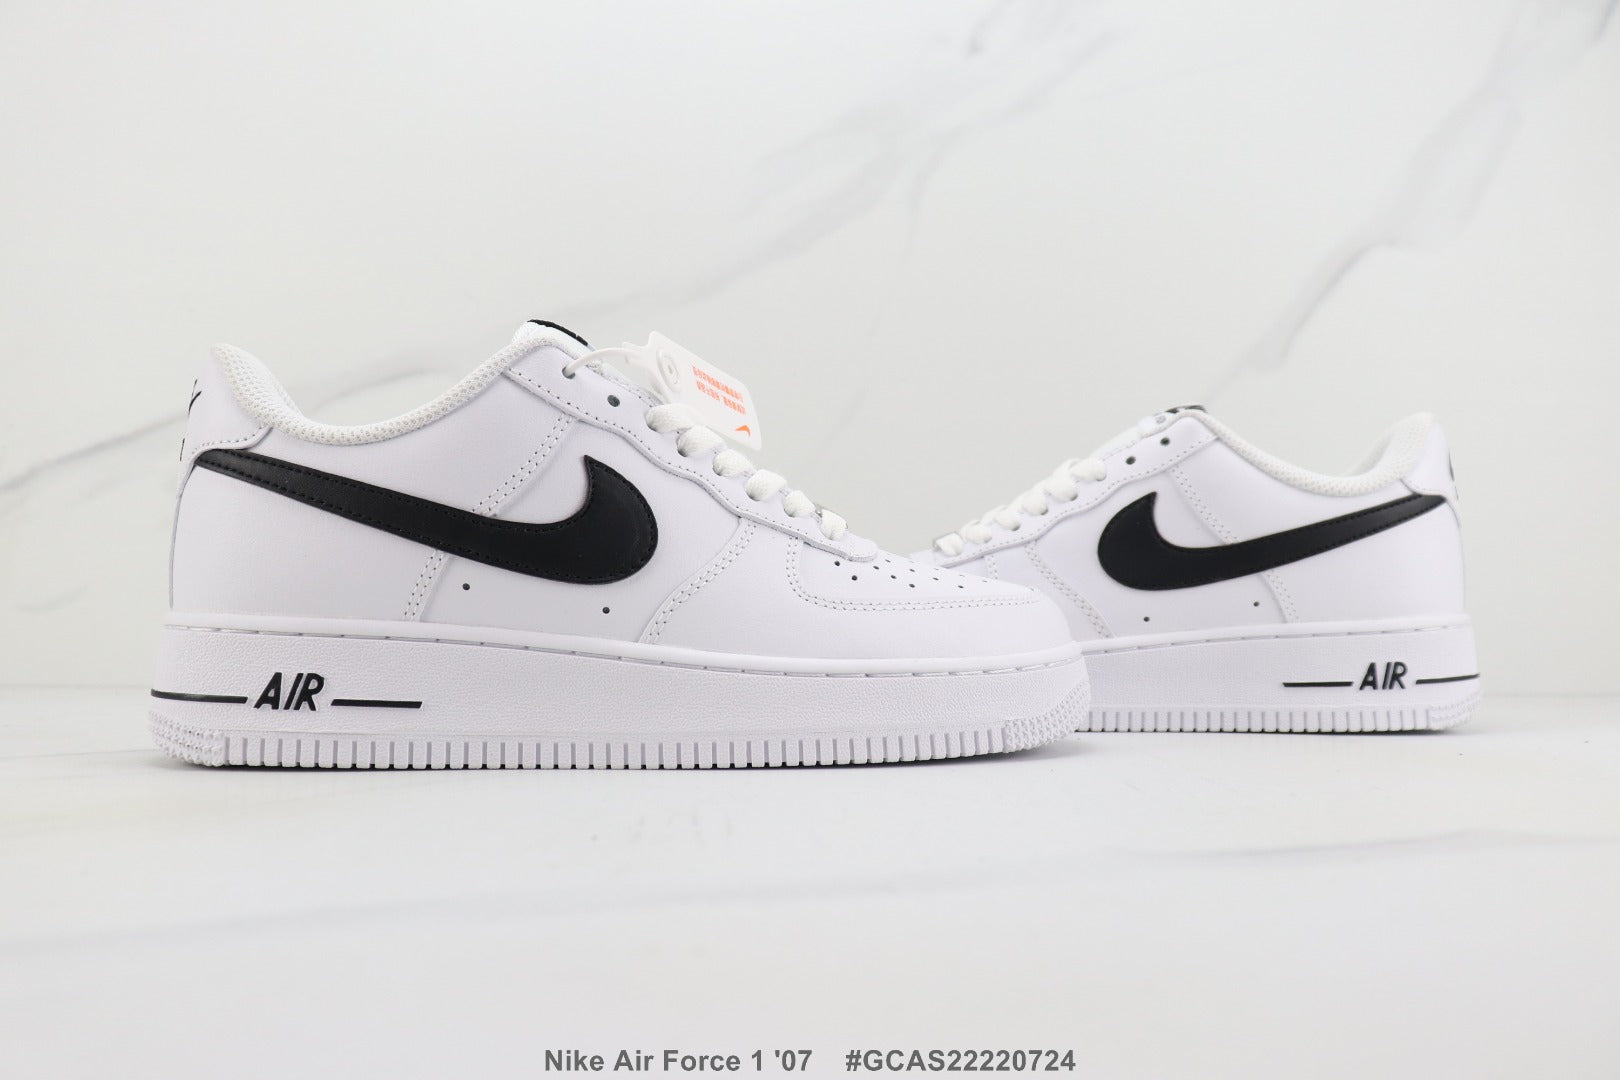 NIKE Air Force 1'07 low top board shoes